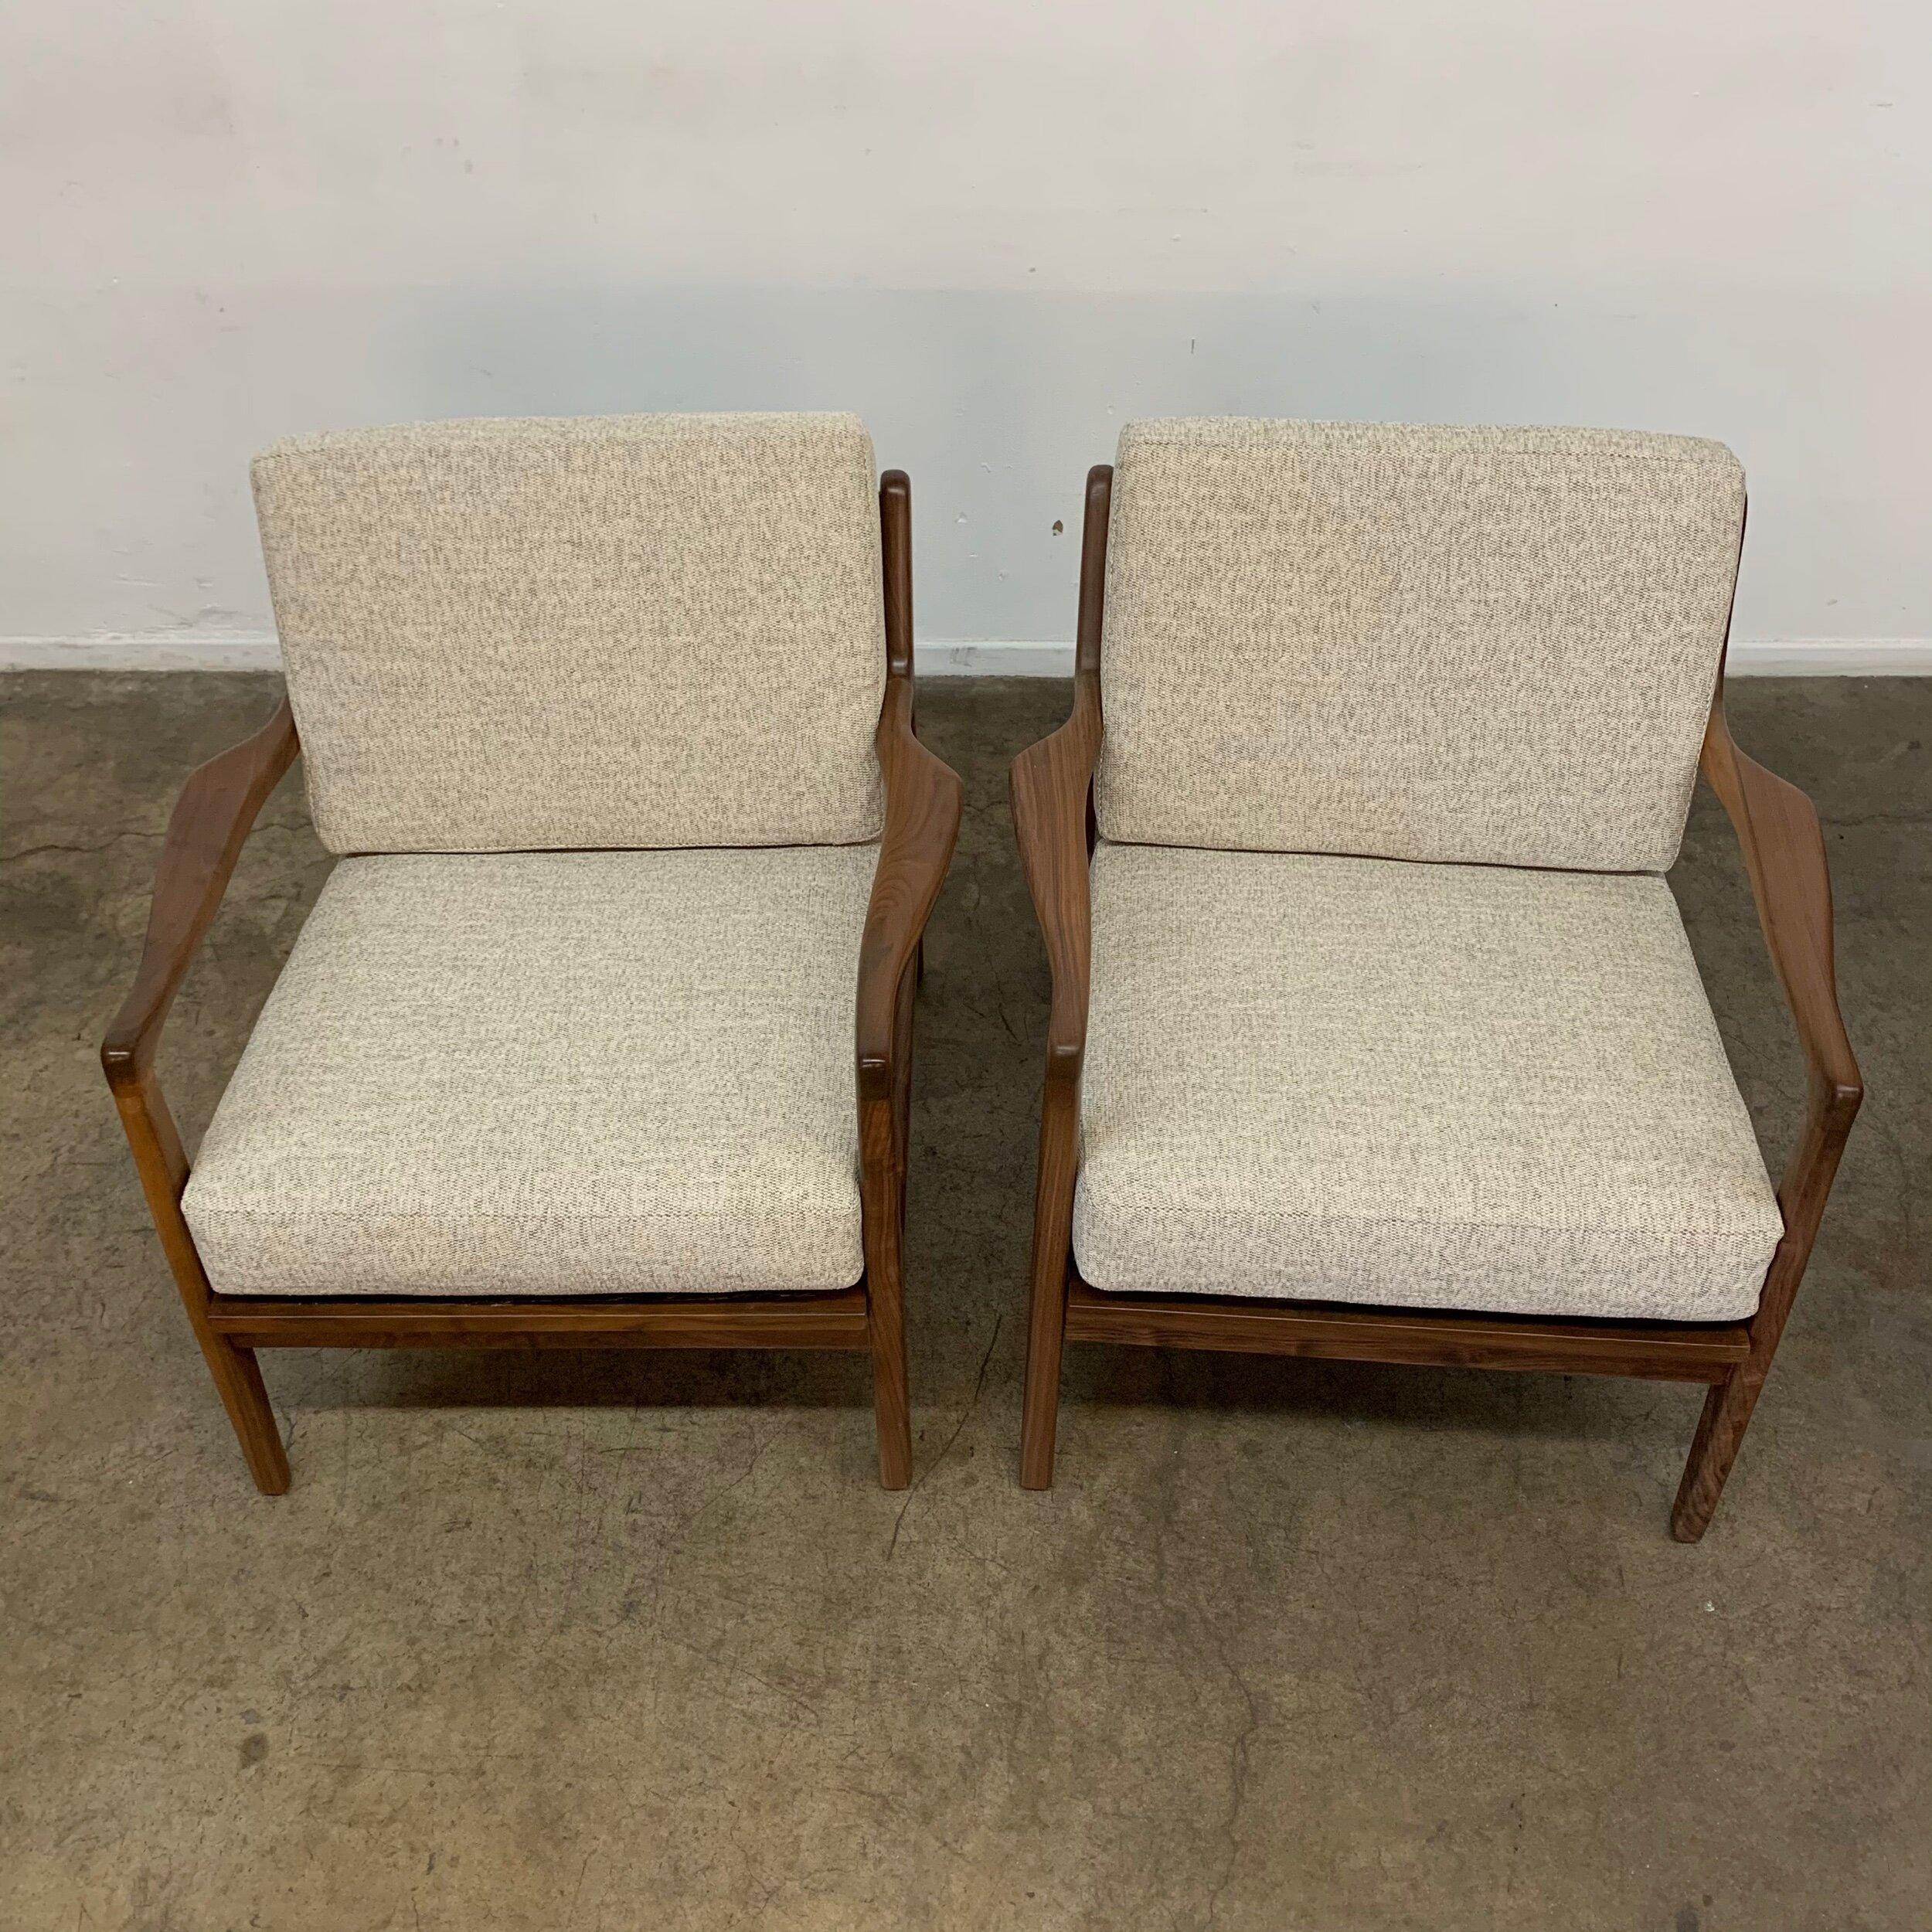 SW22 SD19 SH18 AH5
Made in house using solid walnut wood . The walnut frame has organic walnut grain and tone. 
The chair pictured is available, we have four matching chairs with matching fabric available on floor. (Please note- stock varies and